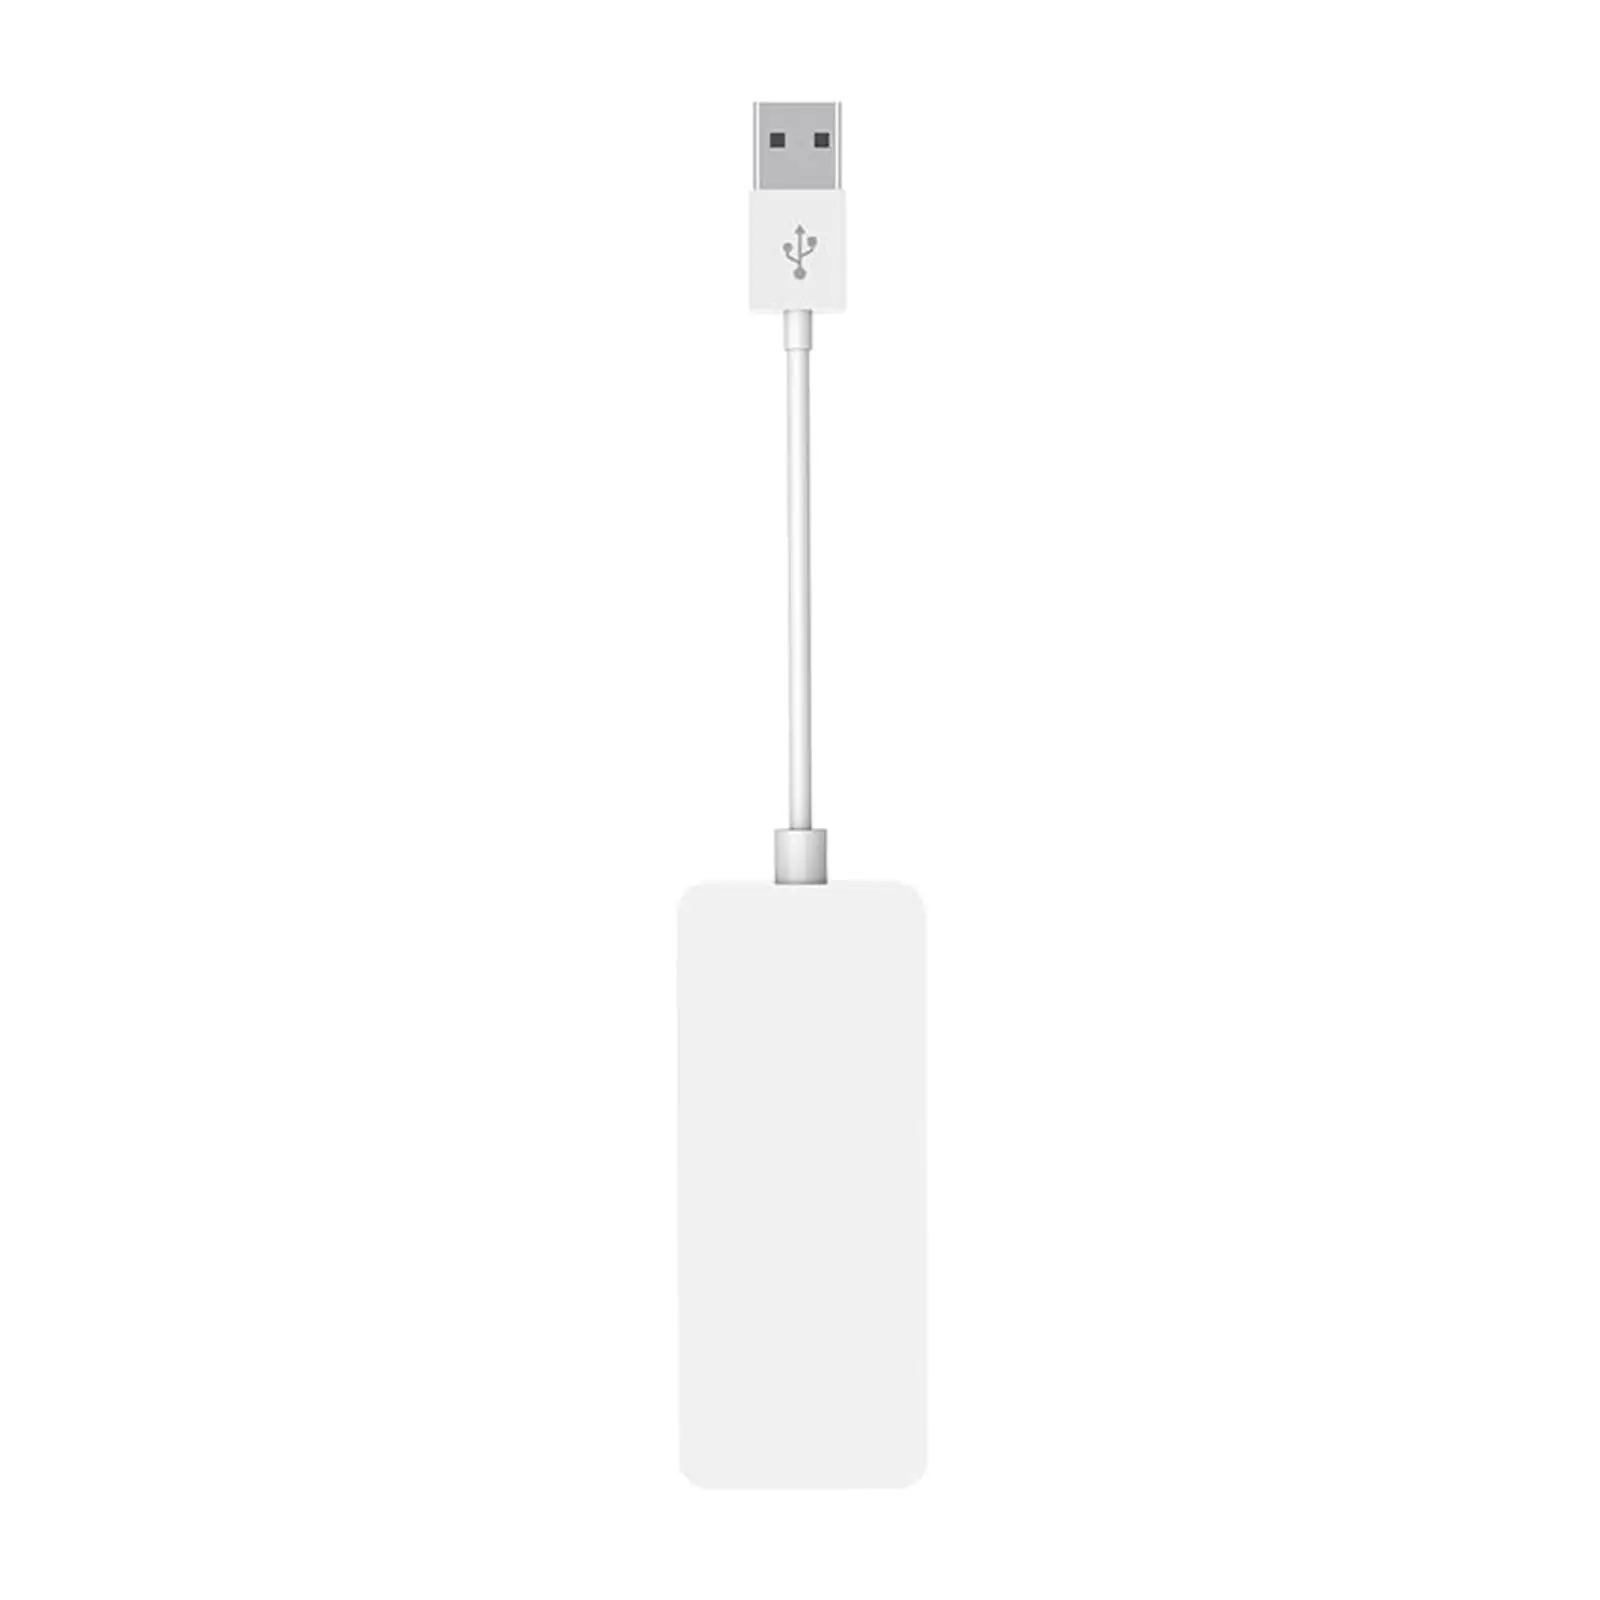 Wired Connection  Dongle for Android Navigation Player Smart Link USB  Stick with Android Auto, White